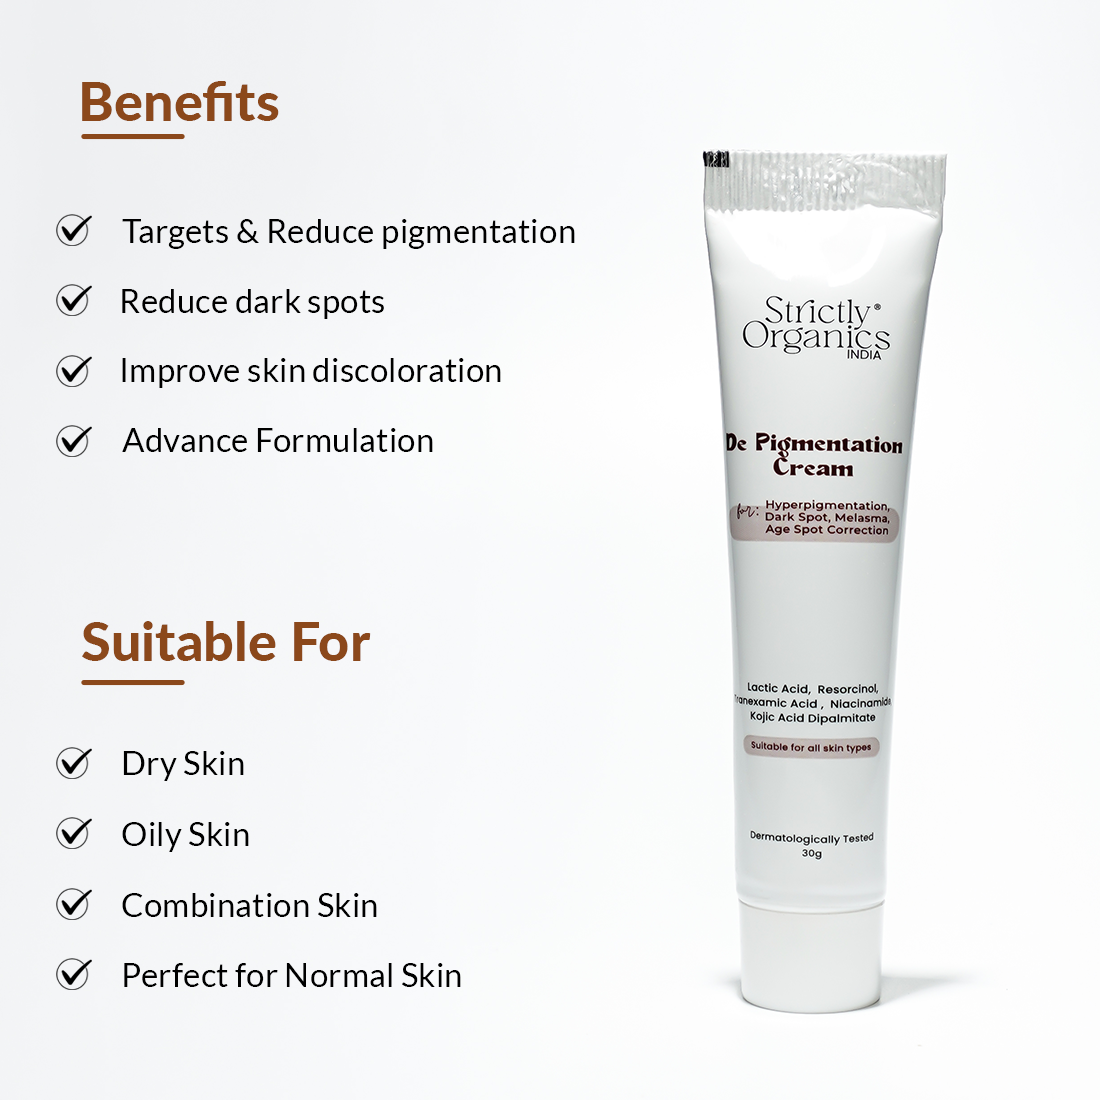 Depigmentation cream for face - Strictly organics